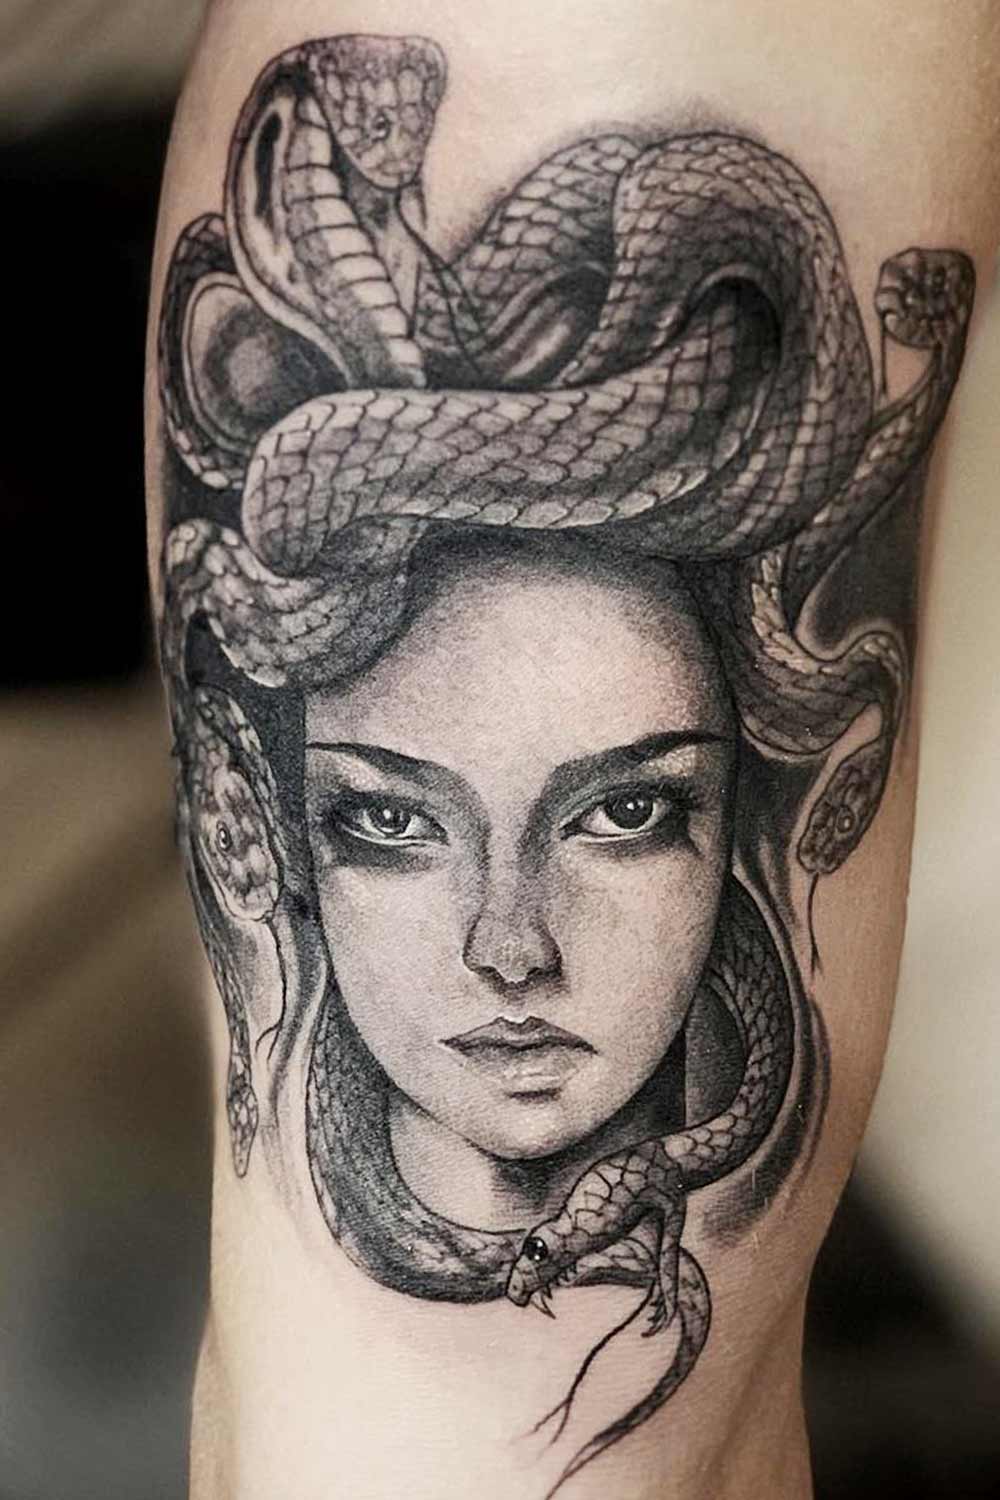 What is the Symbolism of Medusa Tattoo?